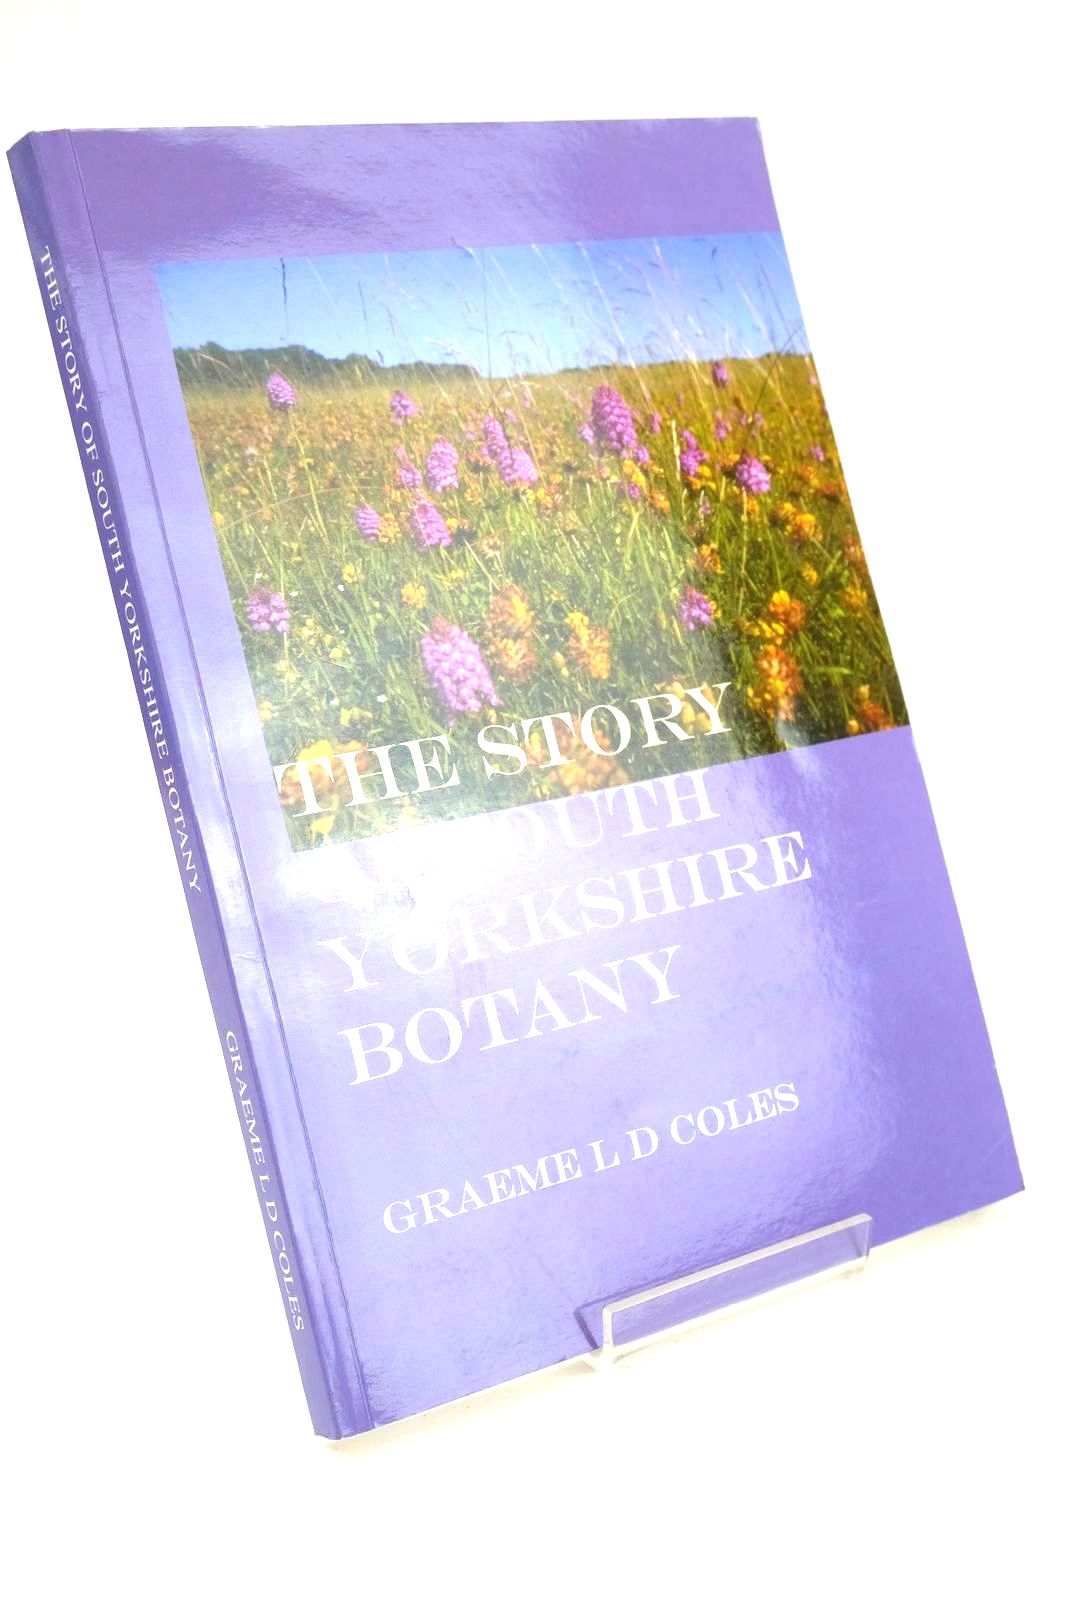 Photo of THE STORY OF SOUTH YORKSHIRE BOTANY written by Coles, Graeme L.D. published by Yorkshire Naturalists' union (STOCK CODE: 1324184)  for sale by Stella & Rose's Books